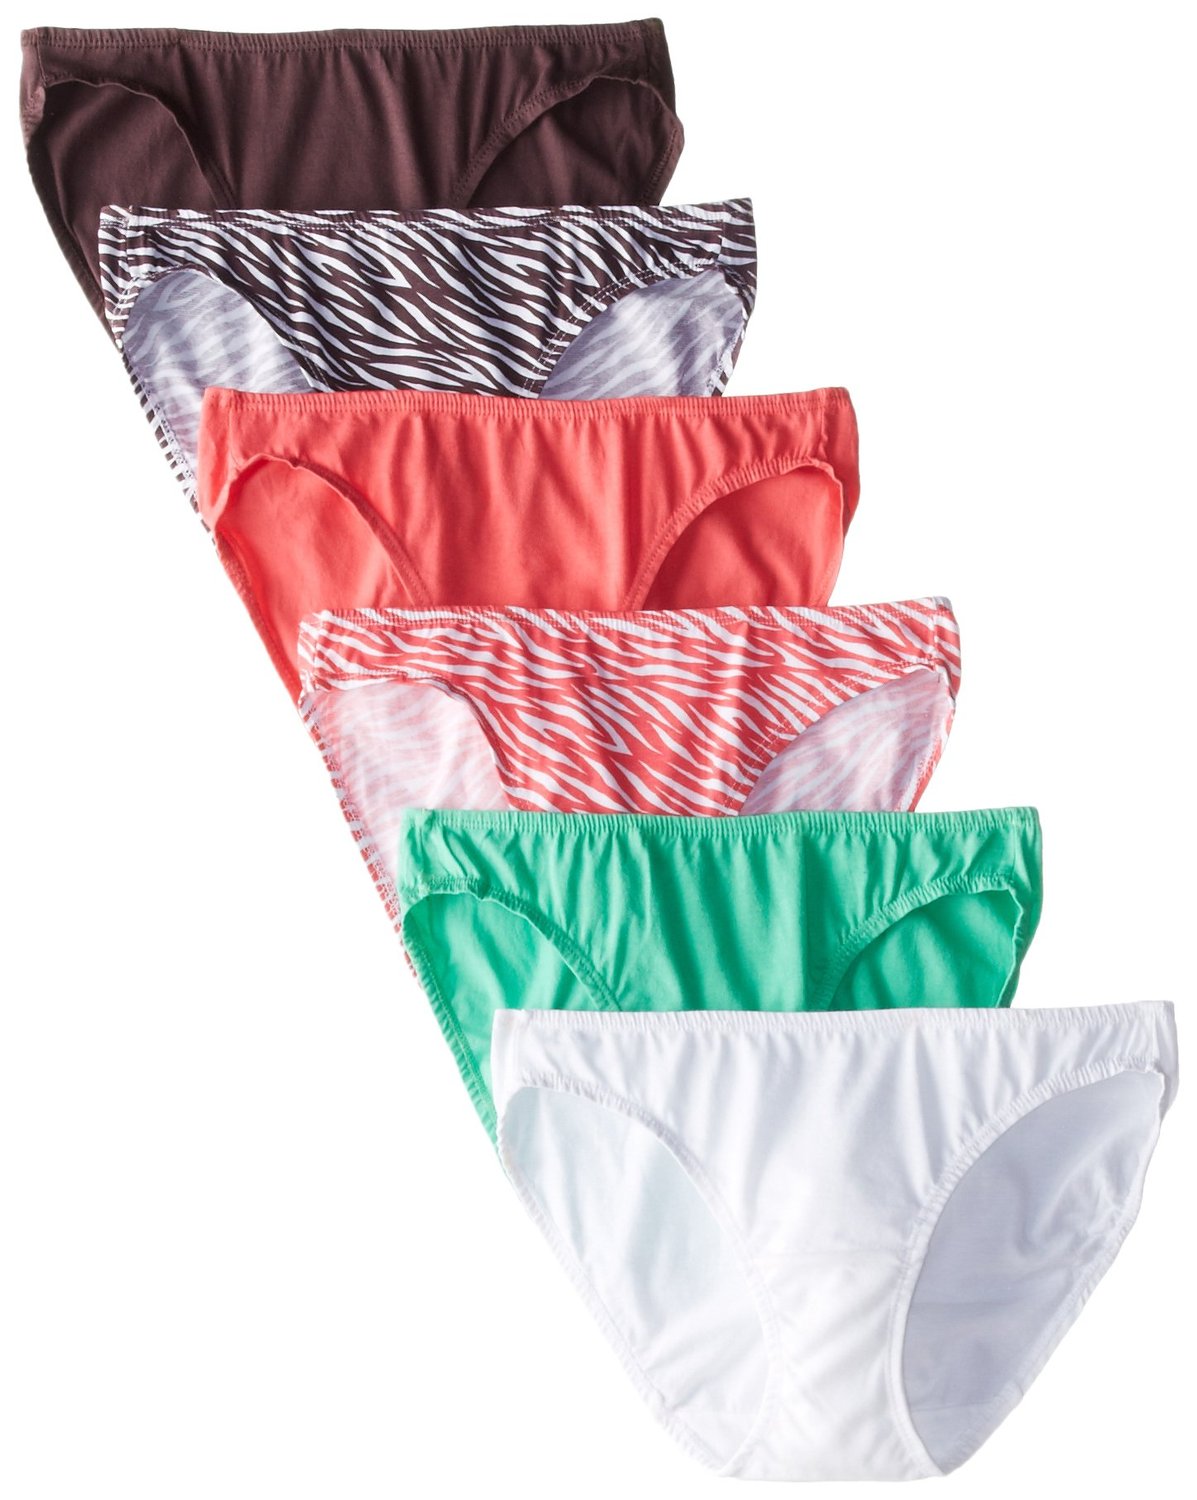 Fruit of the Loom Special Occasion Panties for Women